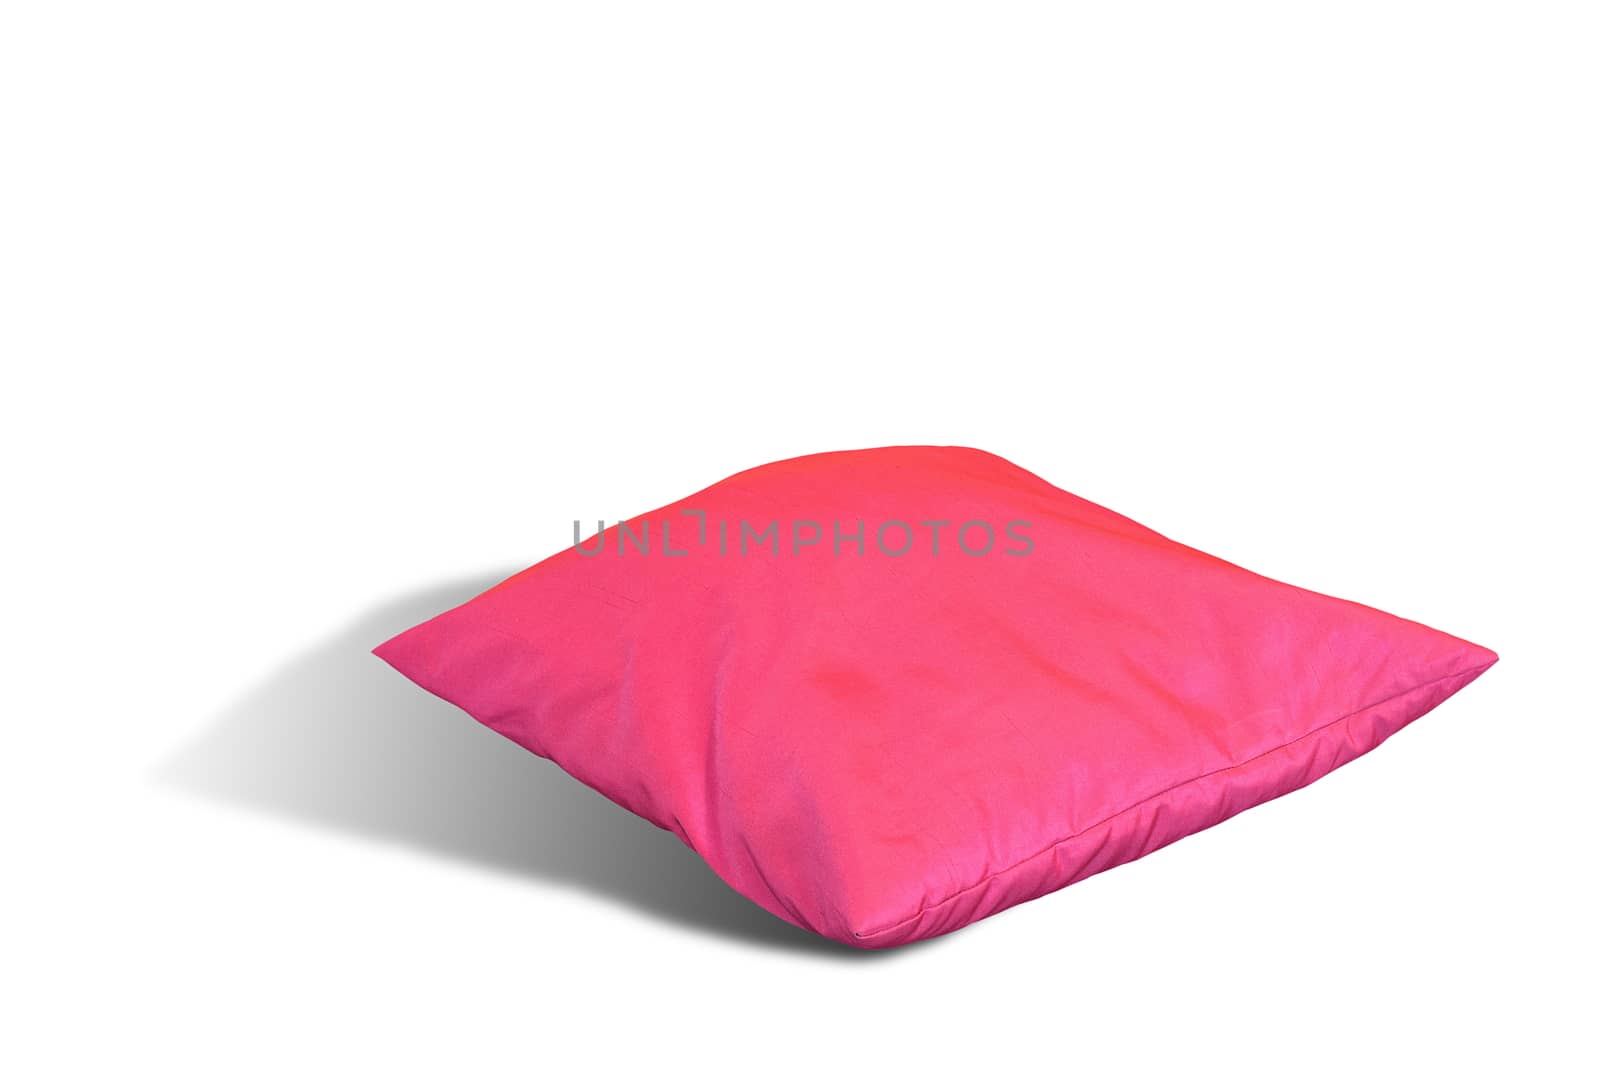 pink pillow over white background by taviphoto